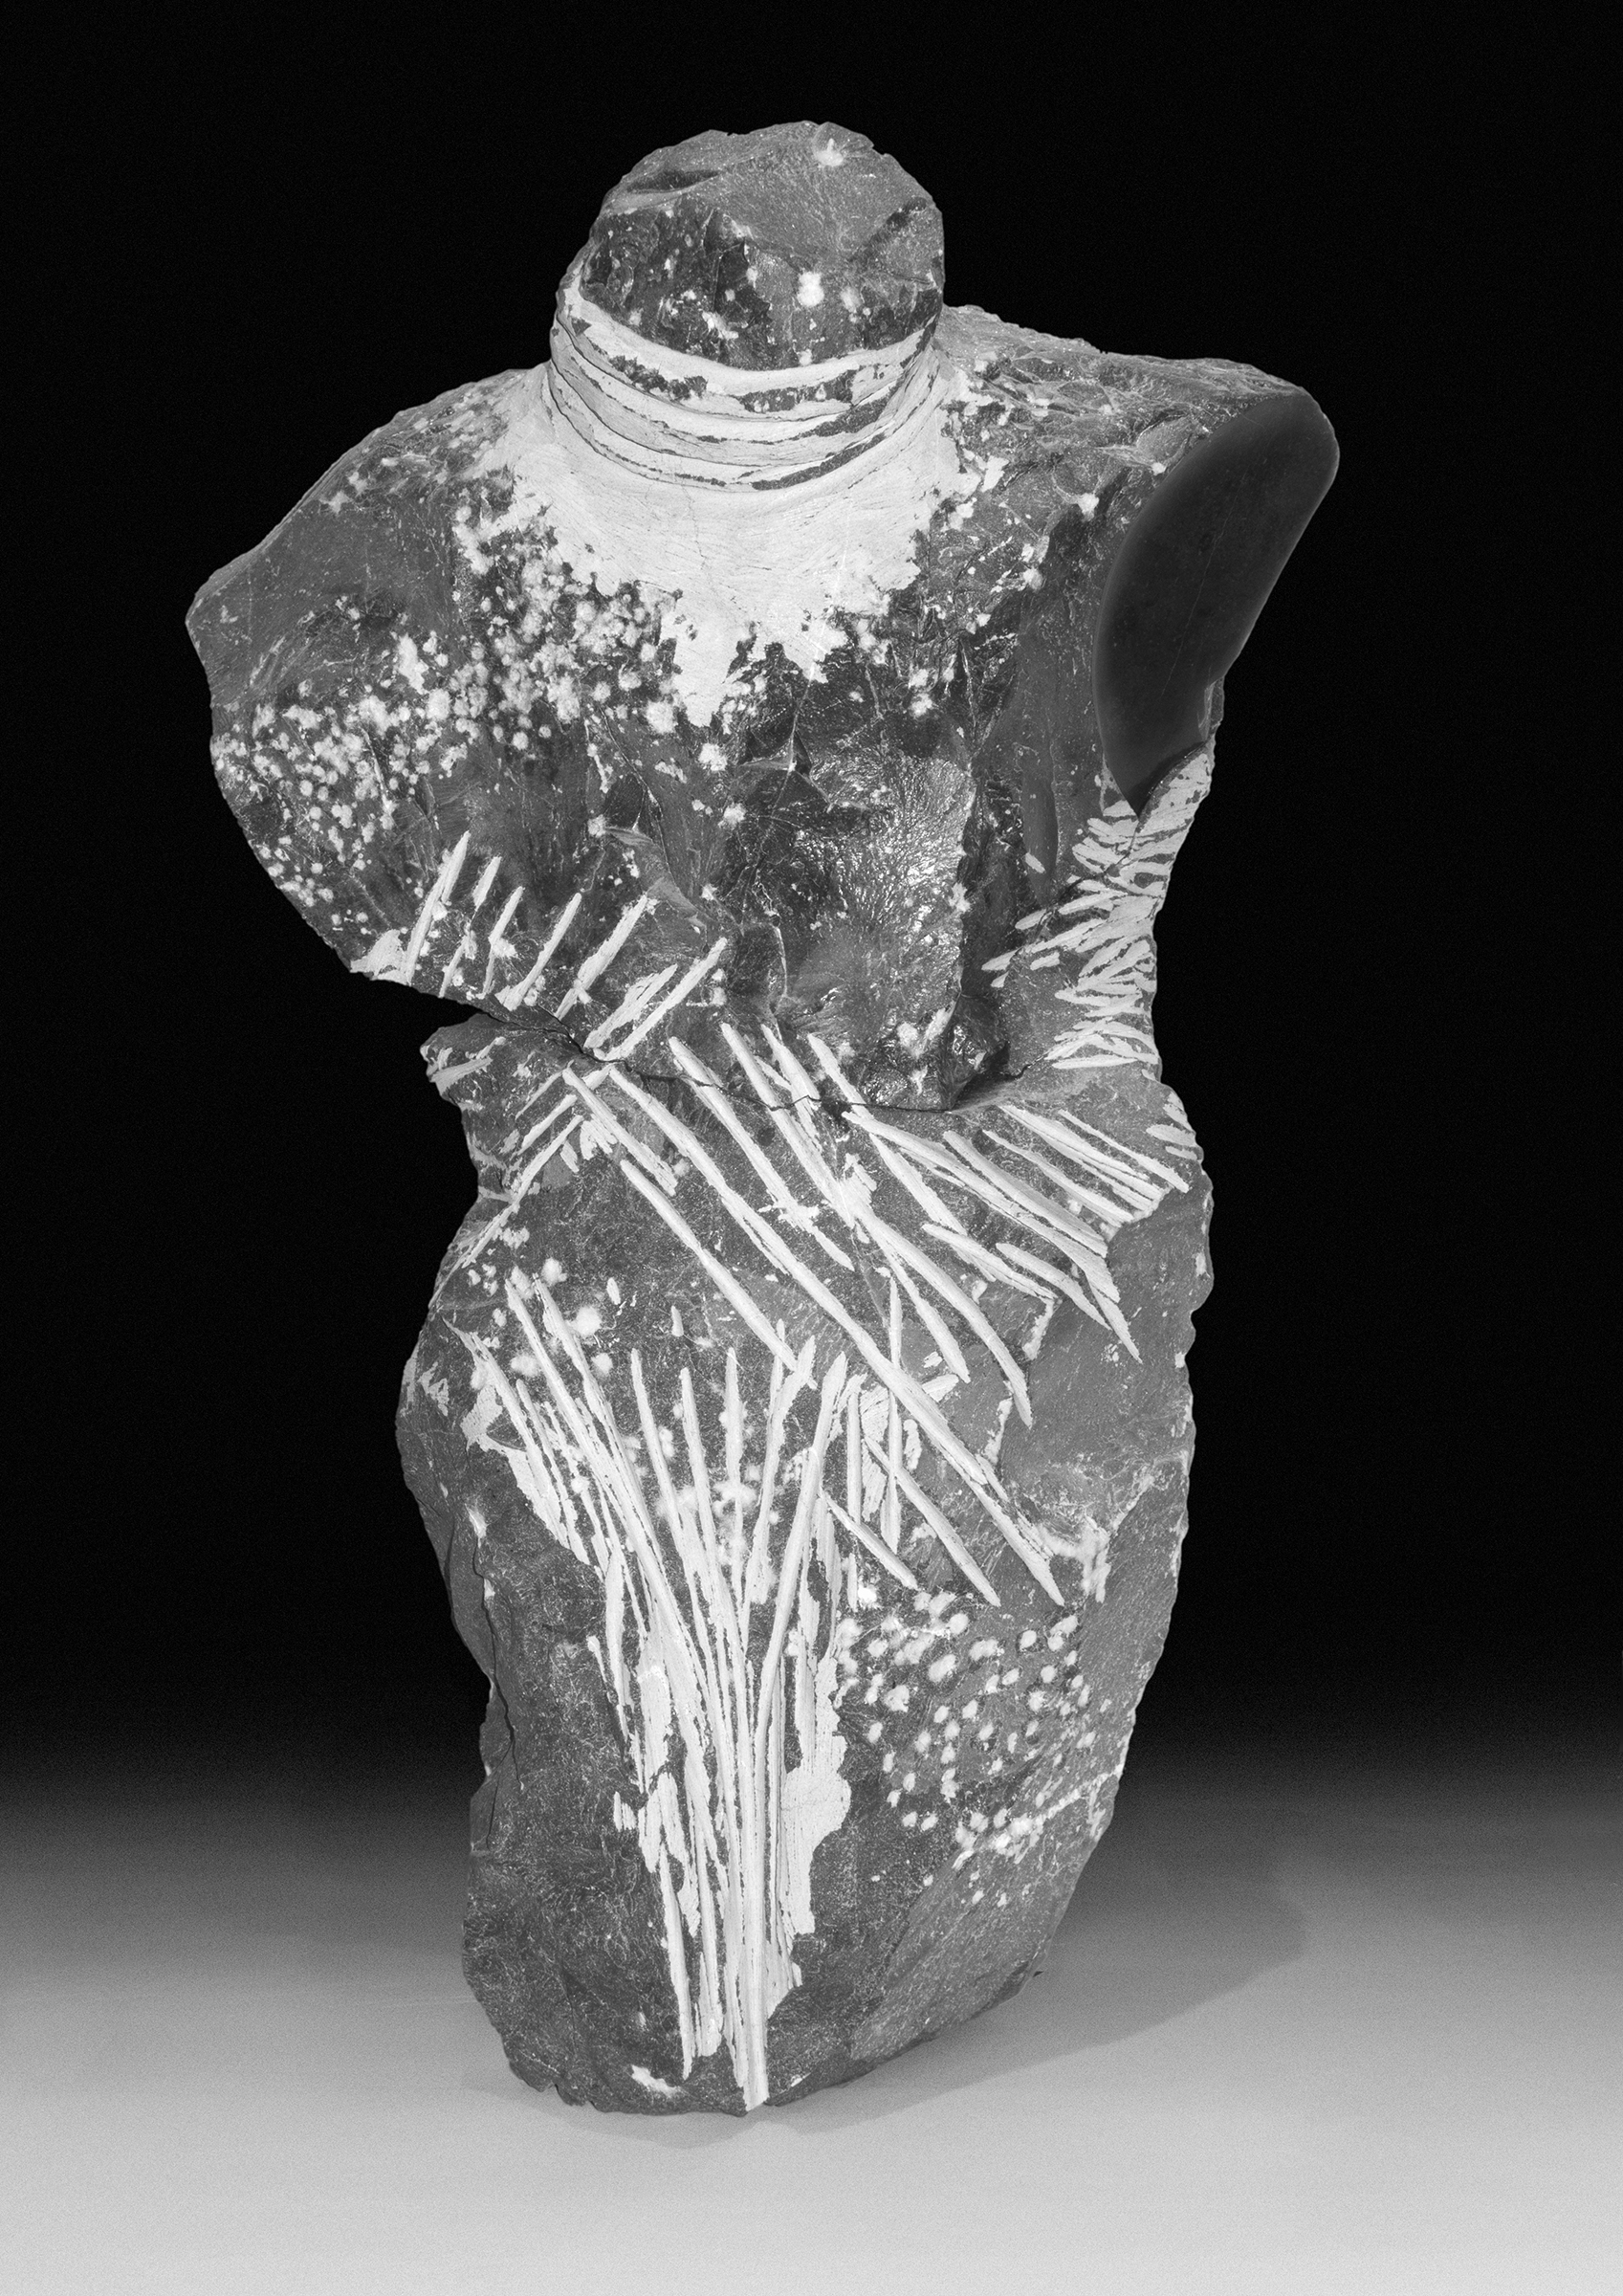 “Torso”, Canadian marble, 17”H x 11”Wx 5”D.  While sculpting this piece, I accidentally broke it in half. I was able to highly polish parts that would have been inaccessible had it remained intact. 